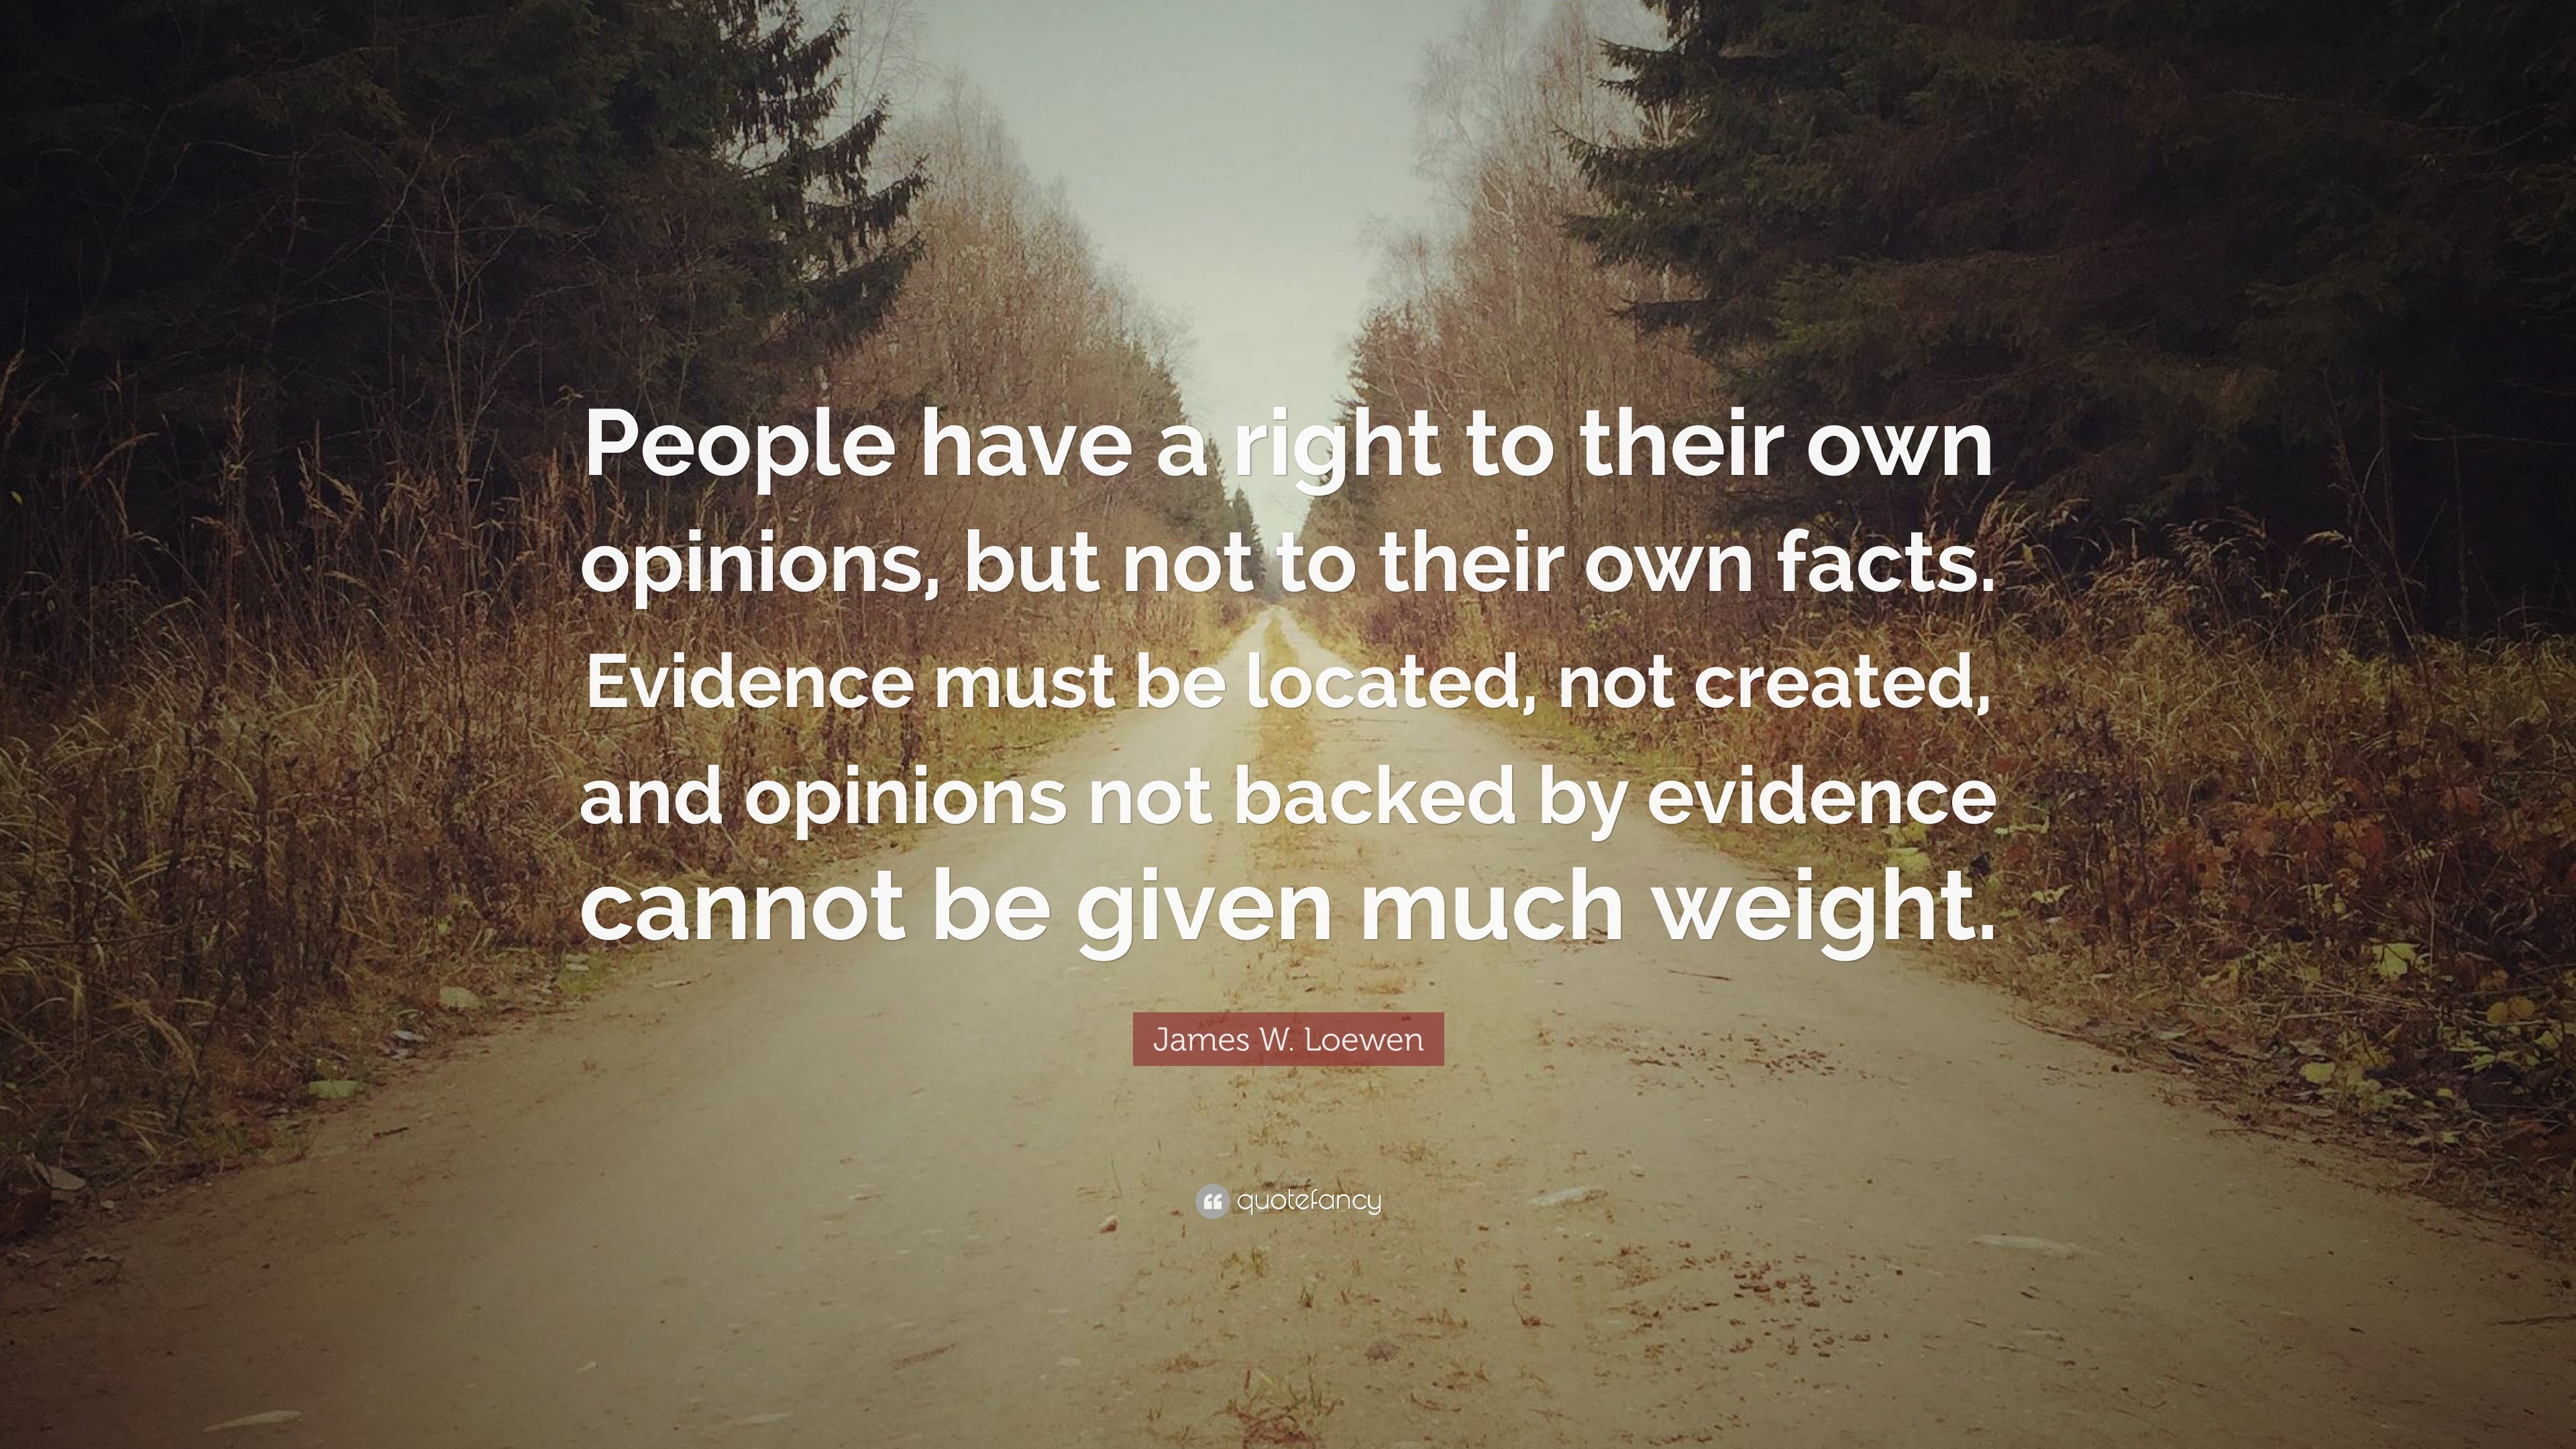 James W. Loewen Quote: “People have a right to their own opinions, but ...